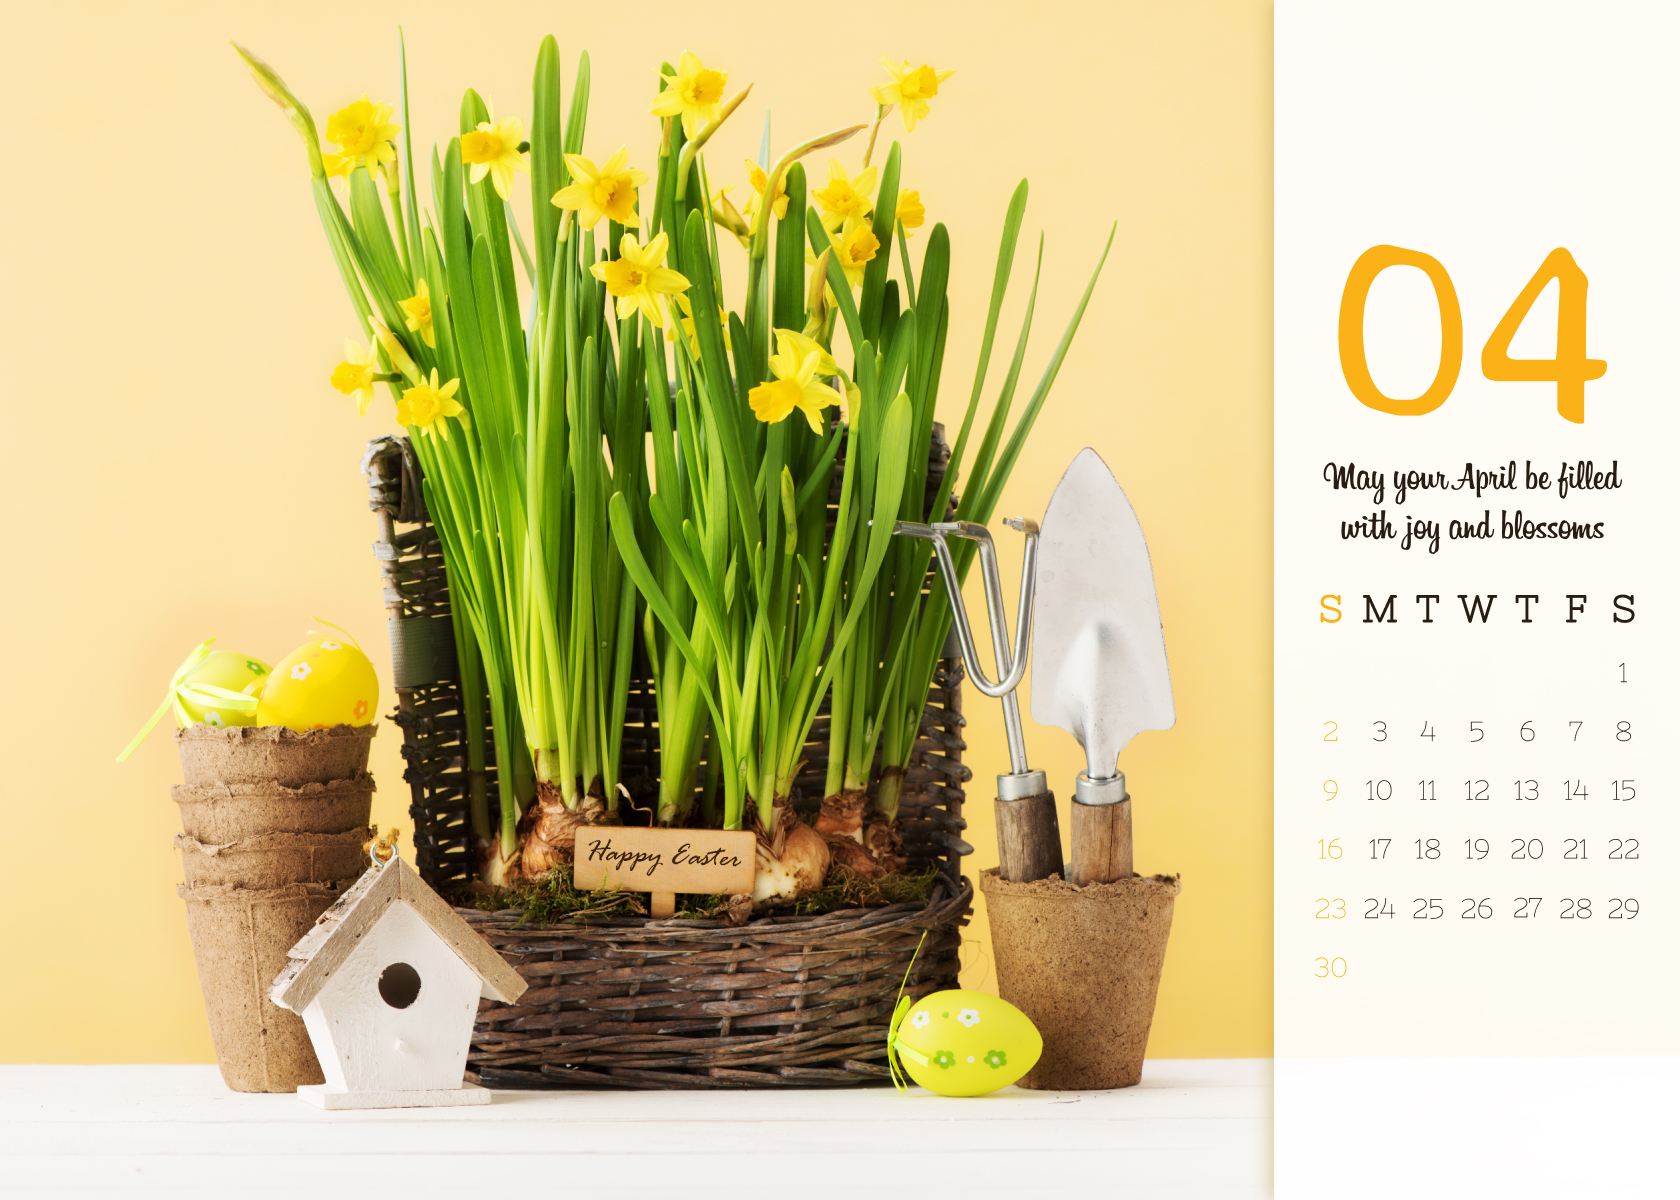 Basket of daffodils on a table next to a calendar.